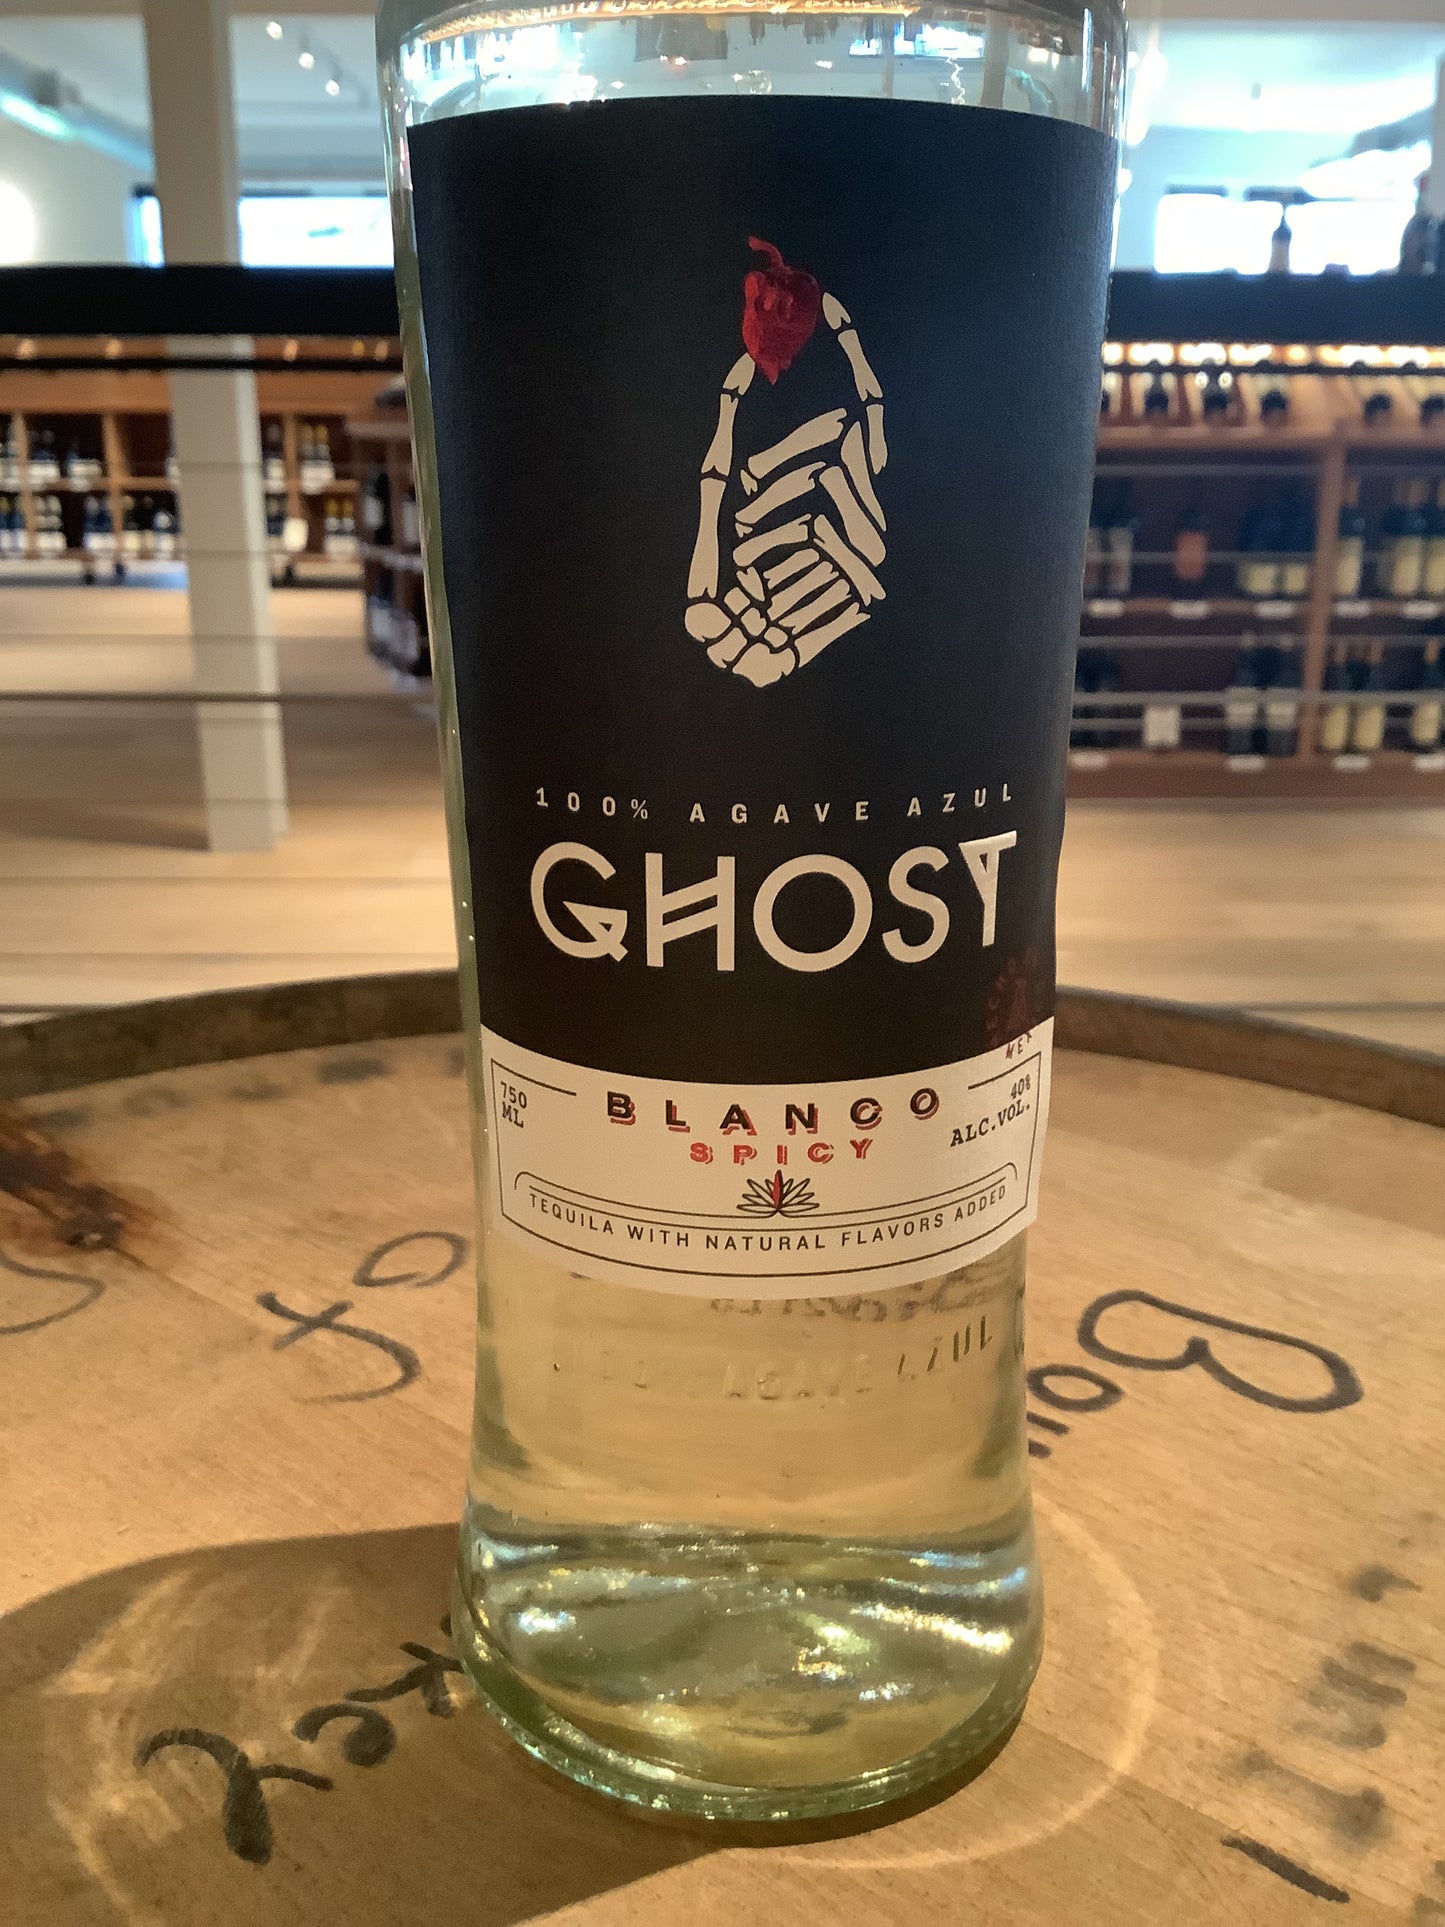 Ghost "pepper" Tequila